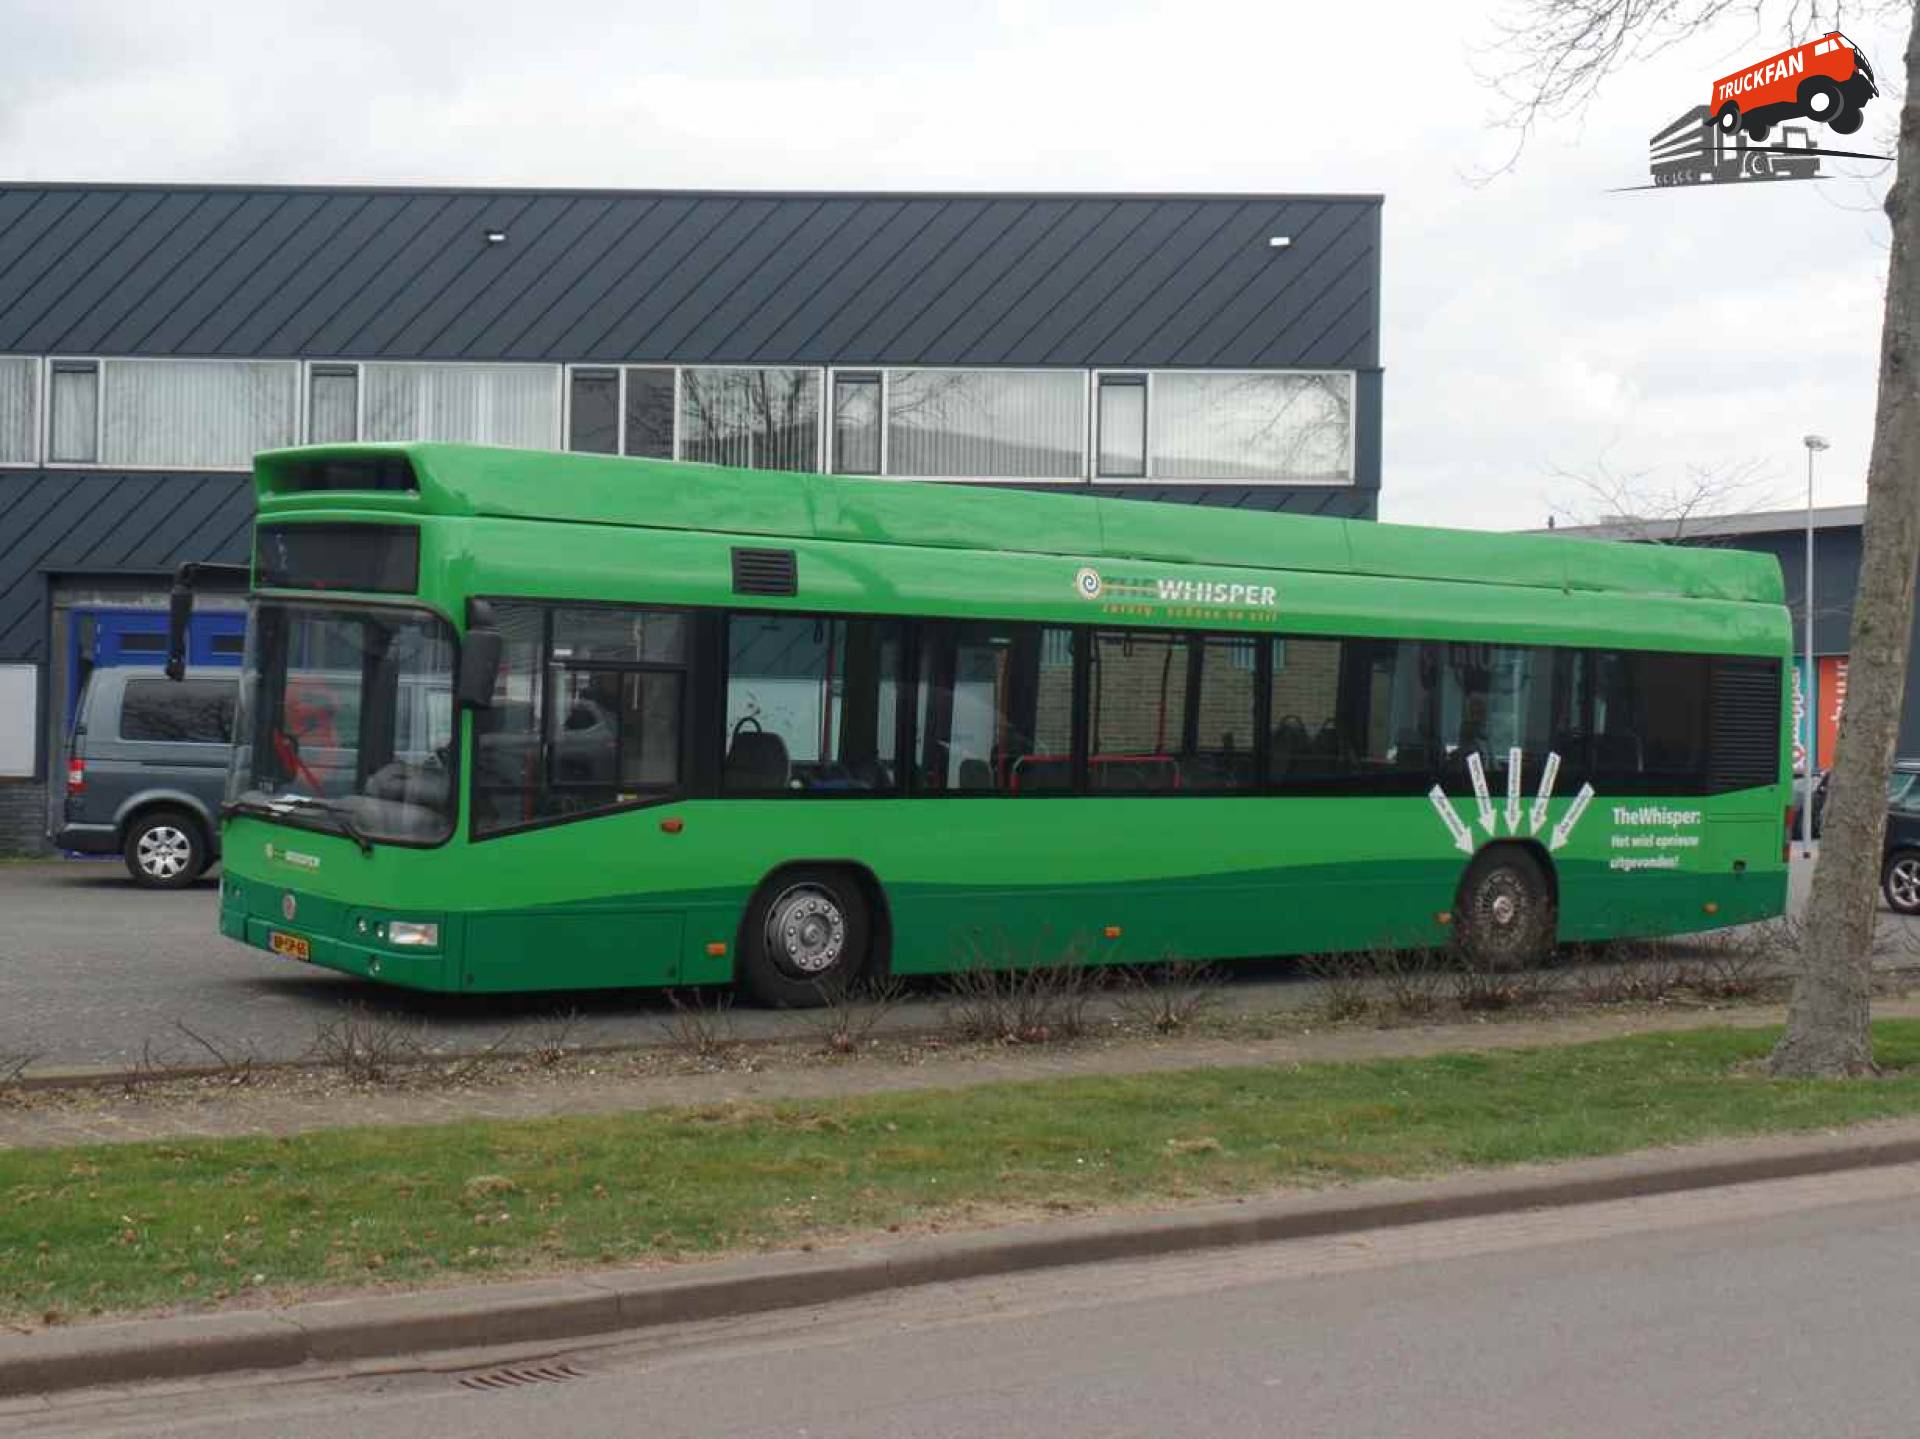 Volvo buschassis